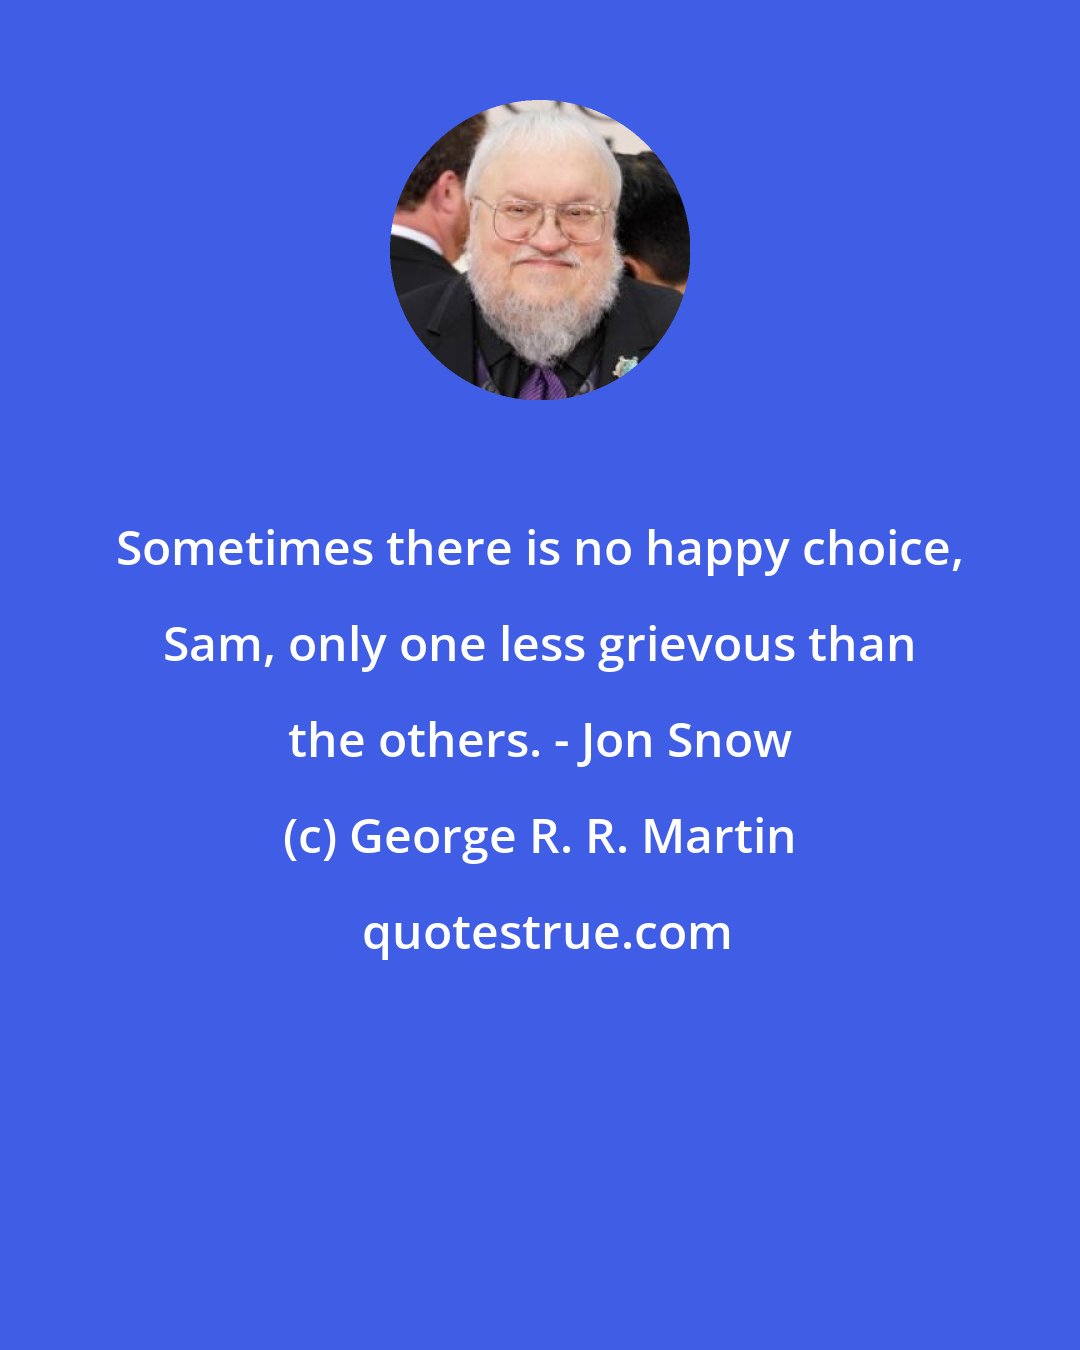 George R. R. Martin: Sometimes there is no happy choice, Sam, only one less grievous than the others. - Jon Snow